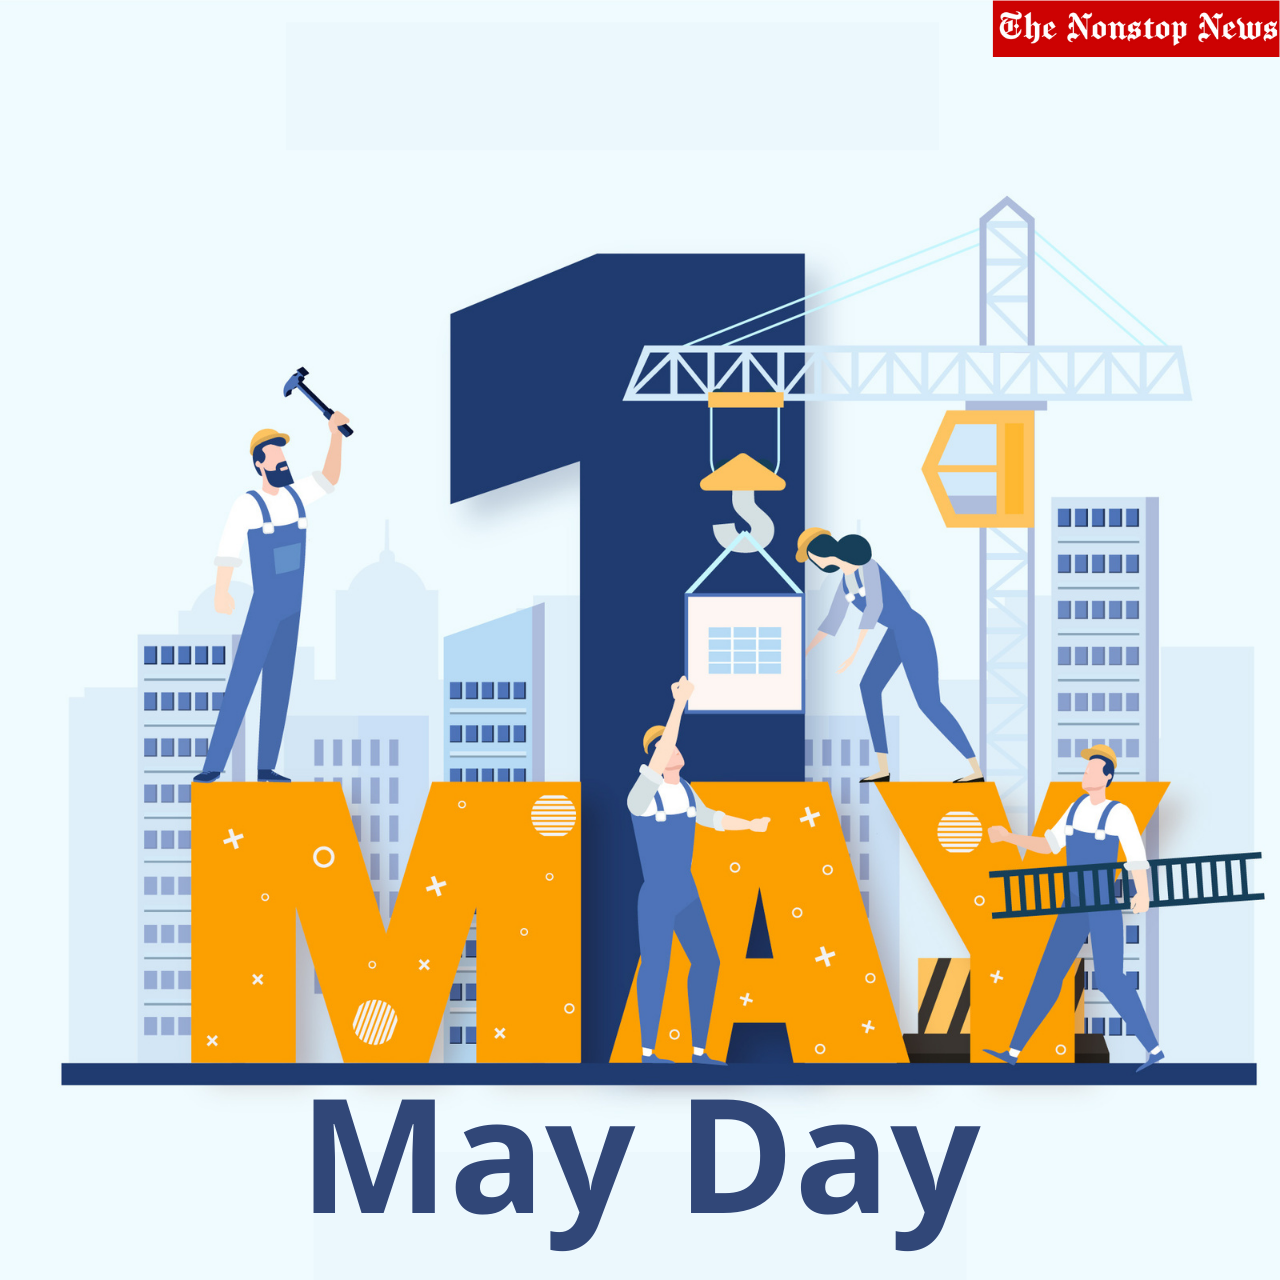 May Day 2022: Top Wishes, Messages, HD Images, Greetings, Slogans, Posters, Instagram Captions To Share